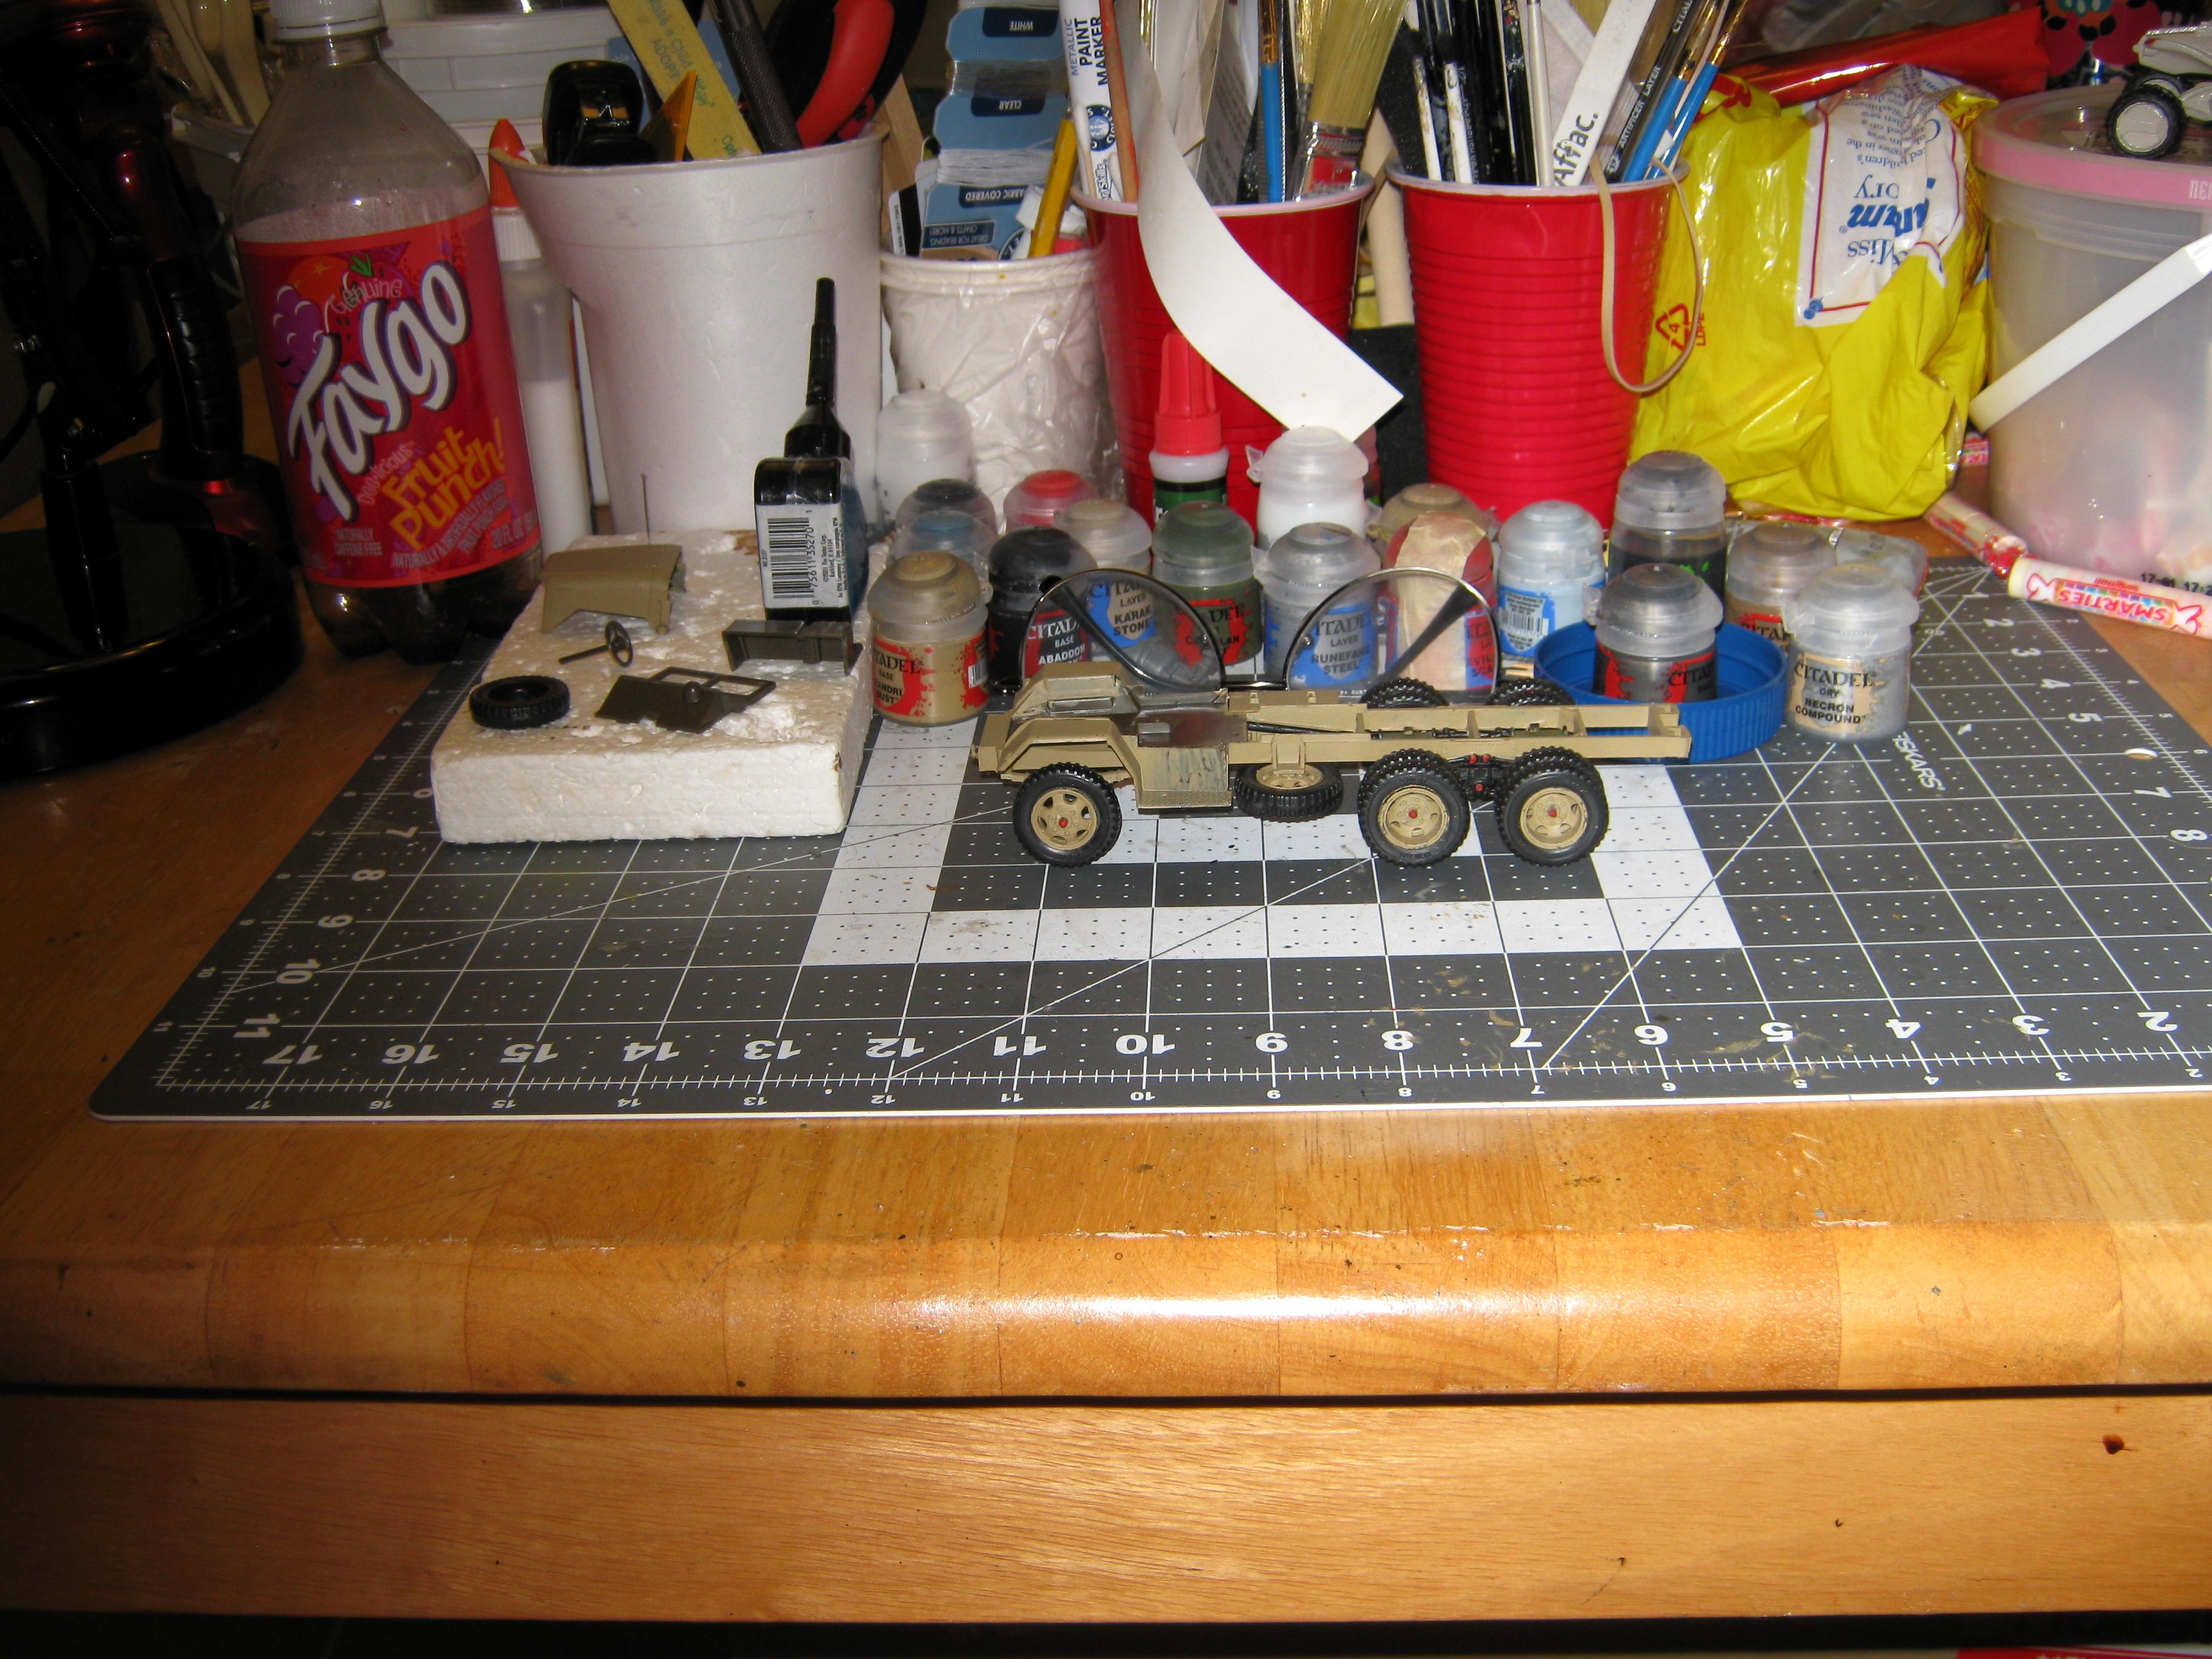 2 1/2 Ton, 6x6, Conversion, Duece And A Half, Gun Truck, Imperial, Imperial Navy, M35, Revell, Transport, Truck, U.s. Army, Vintage